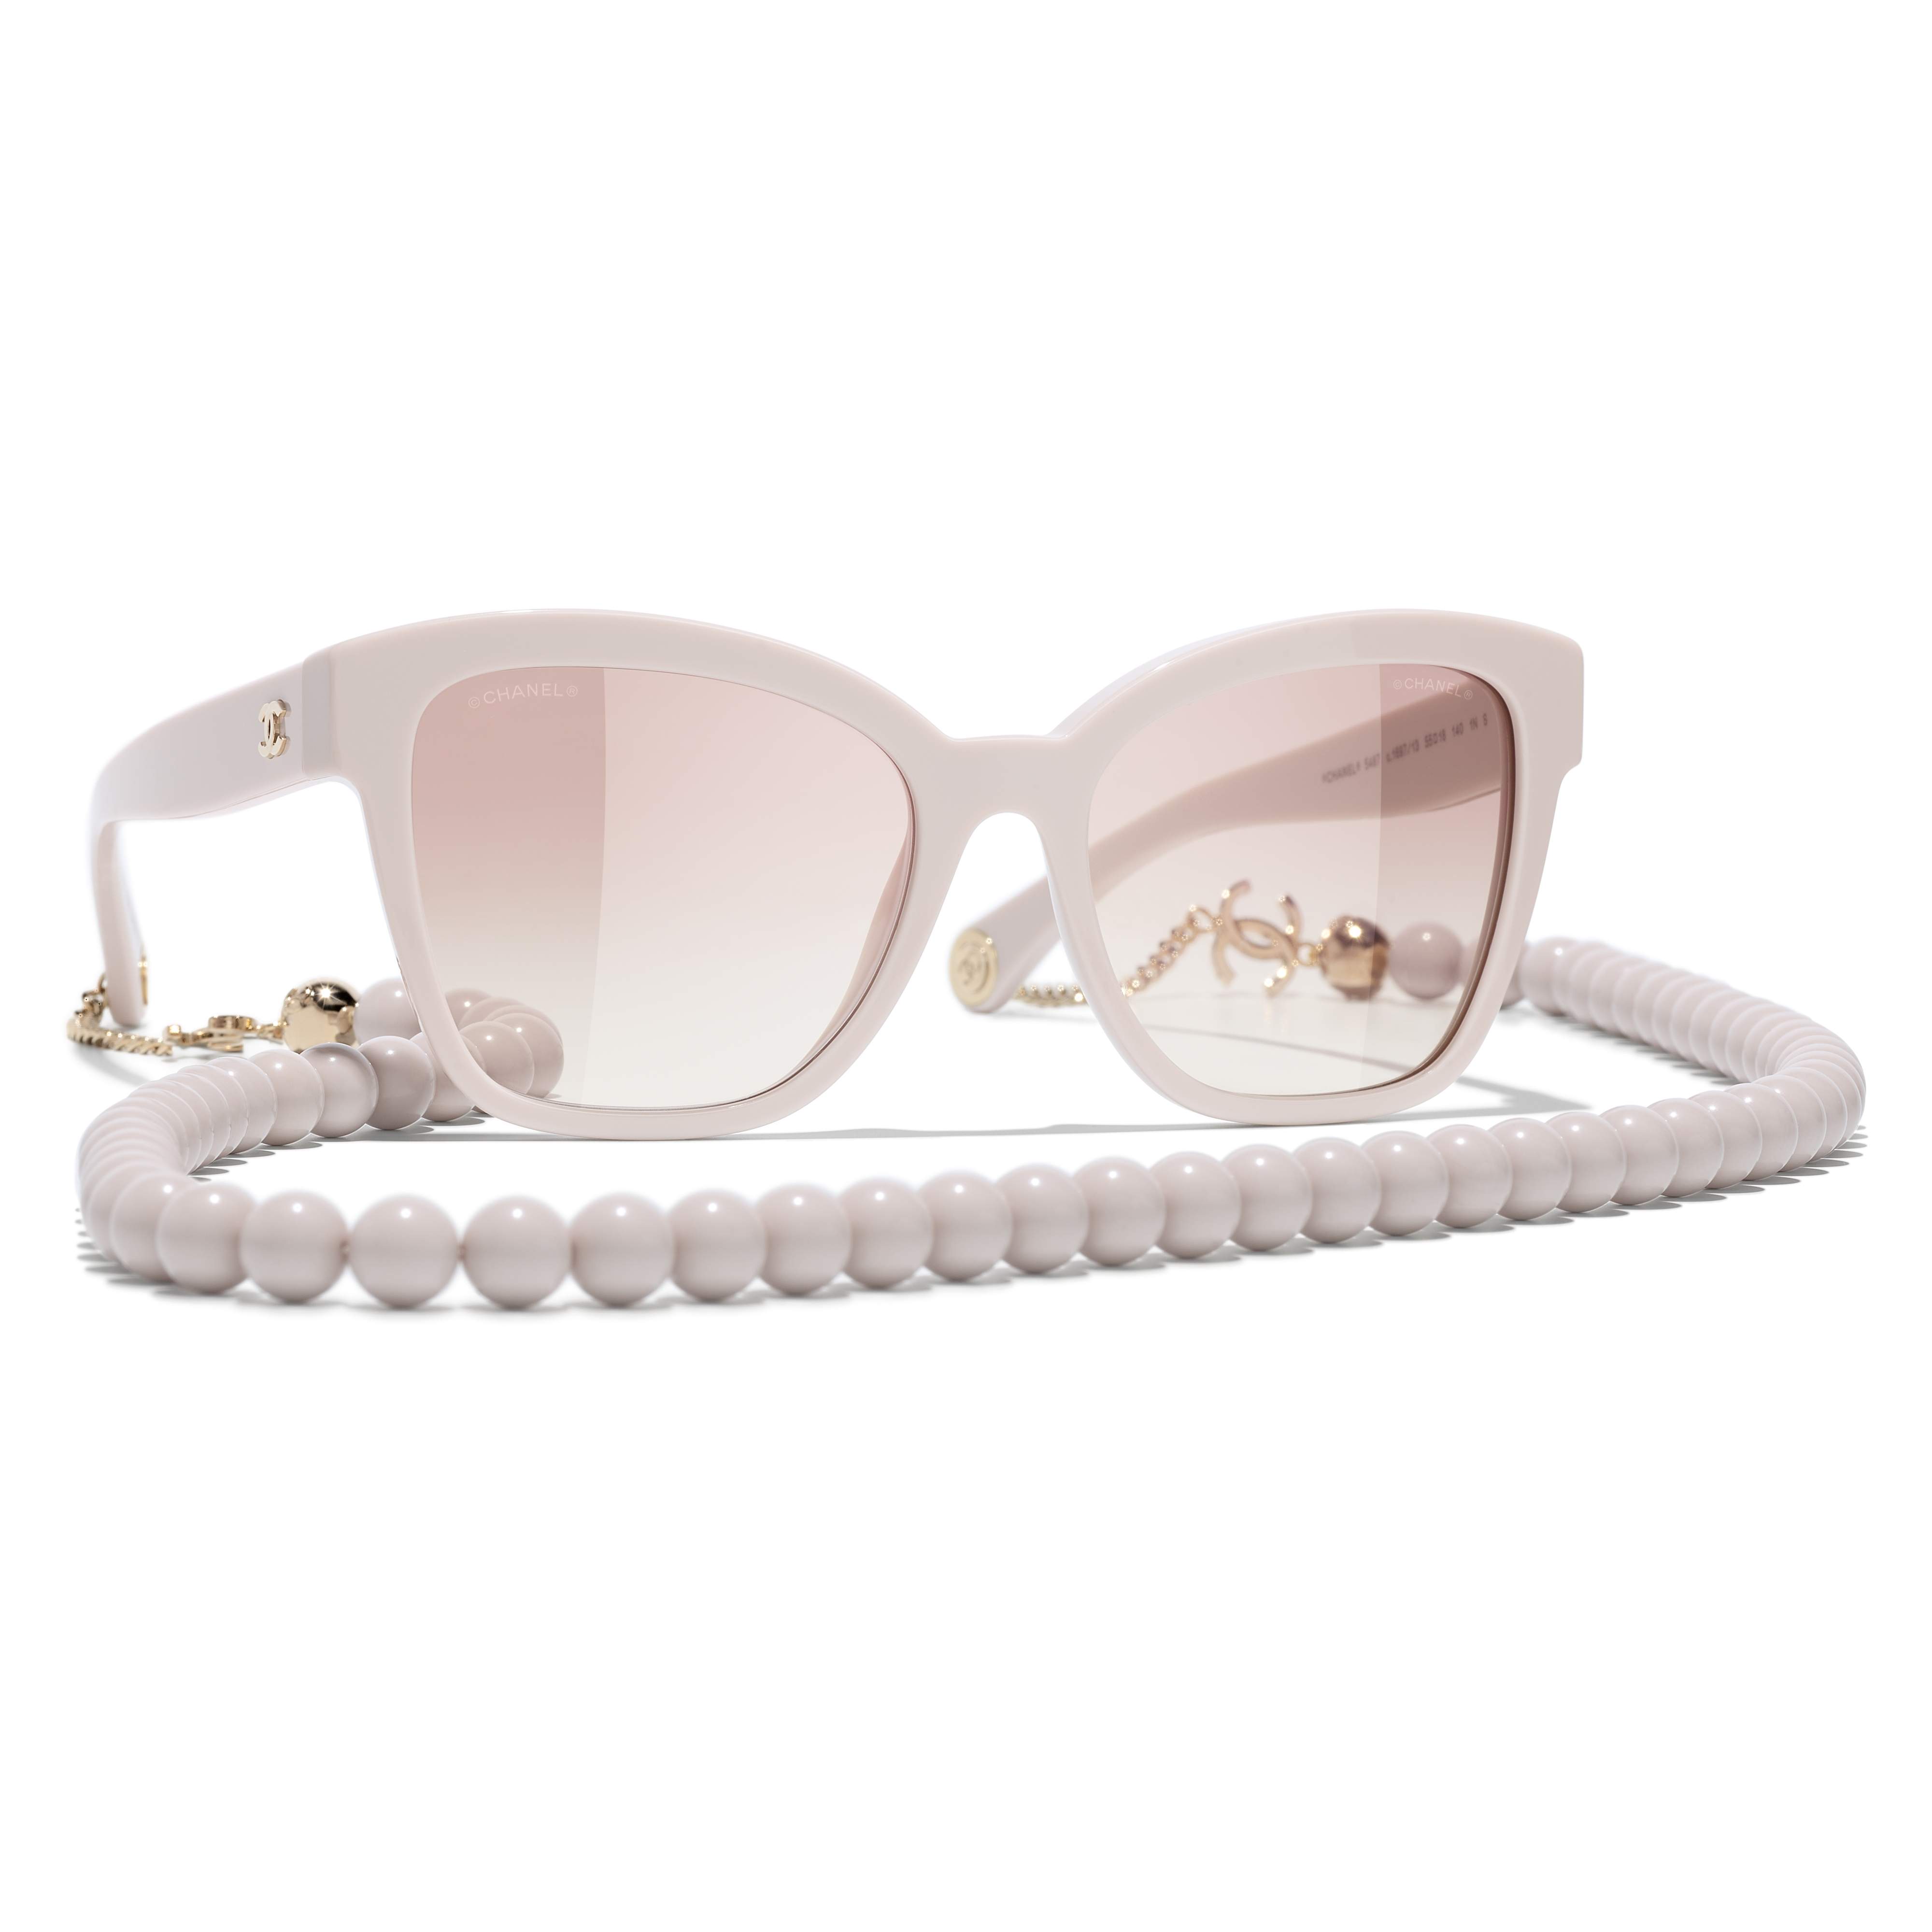 Sunglasses CH5487 1697/13 55-18 Beige in stock Price 750,00 | Visiofactory